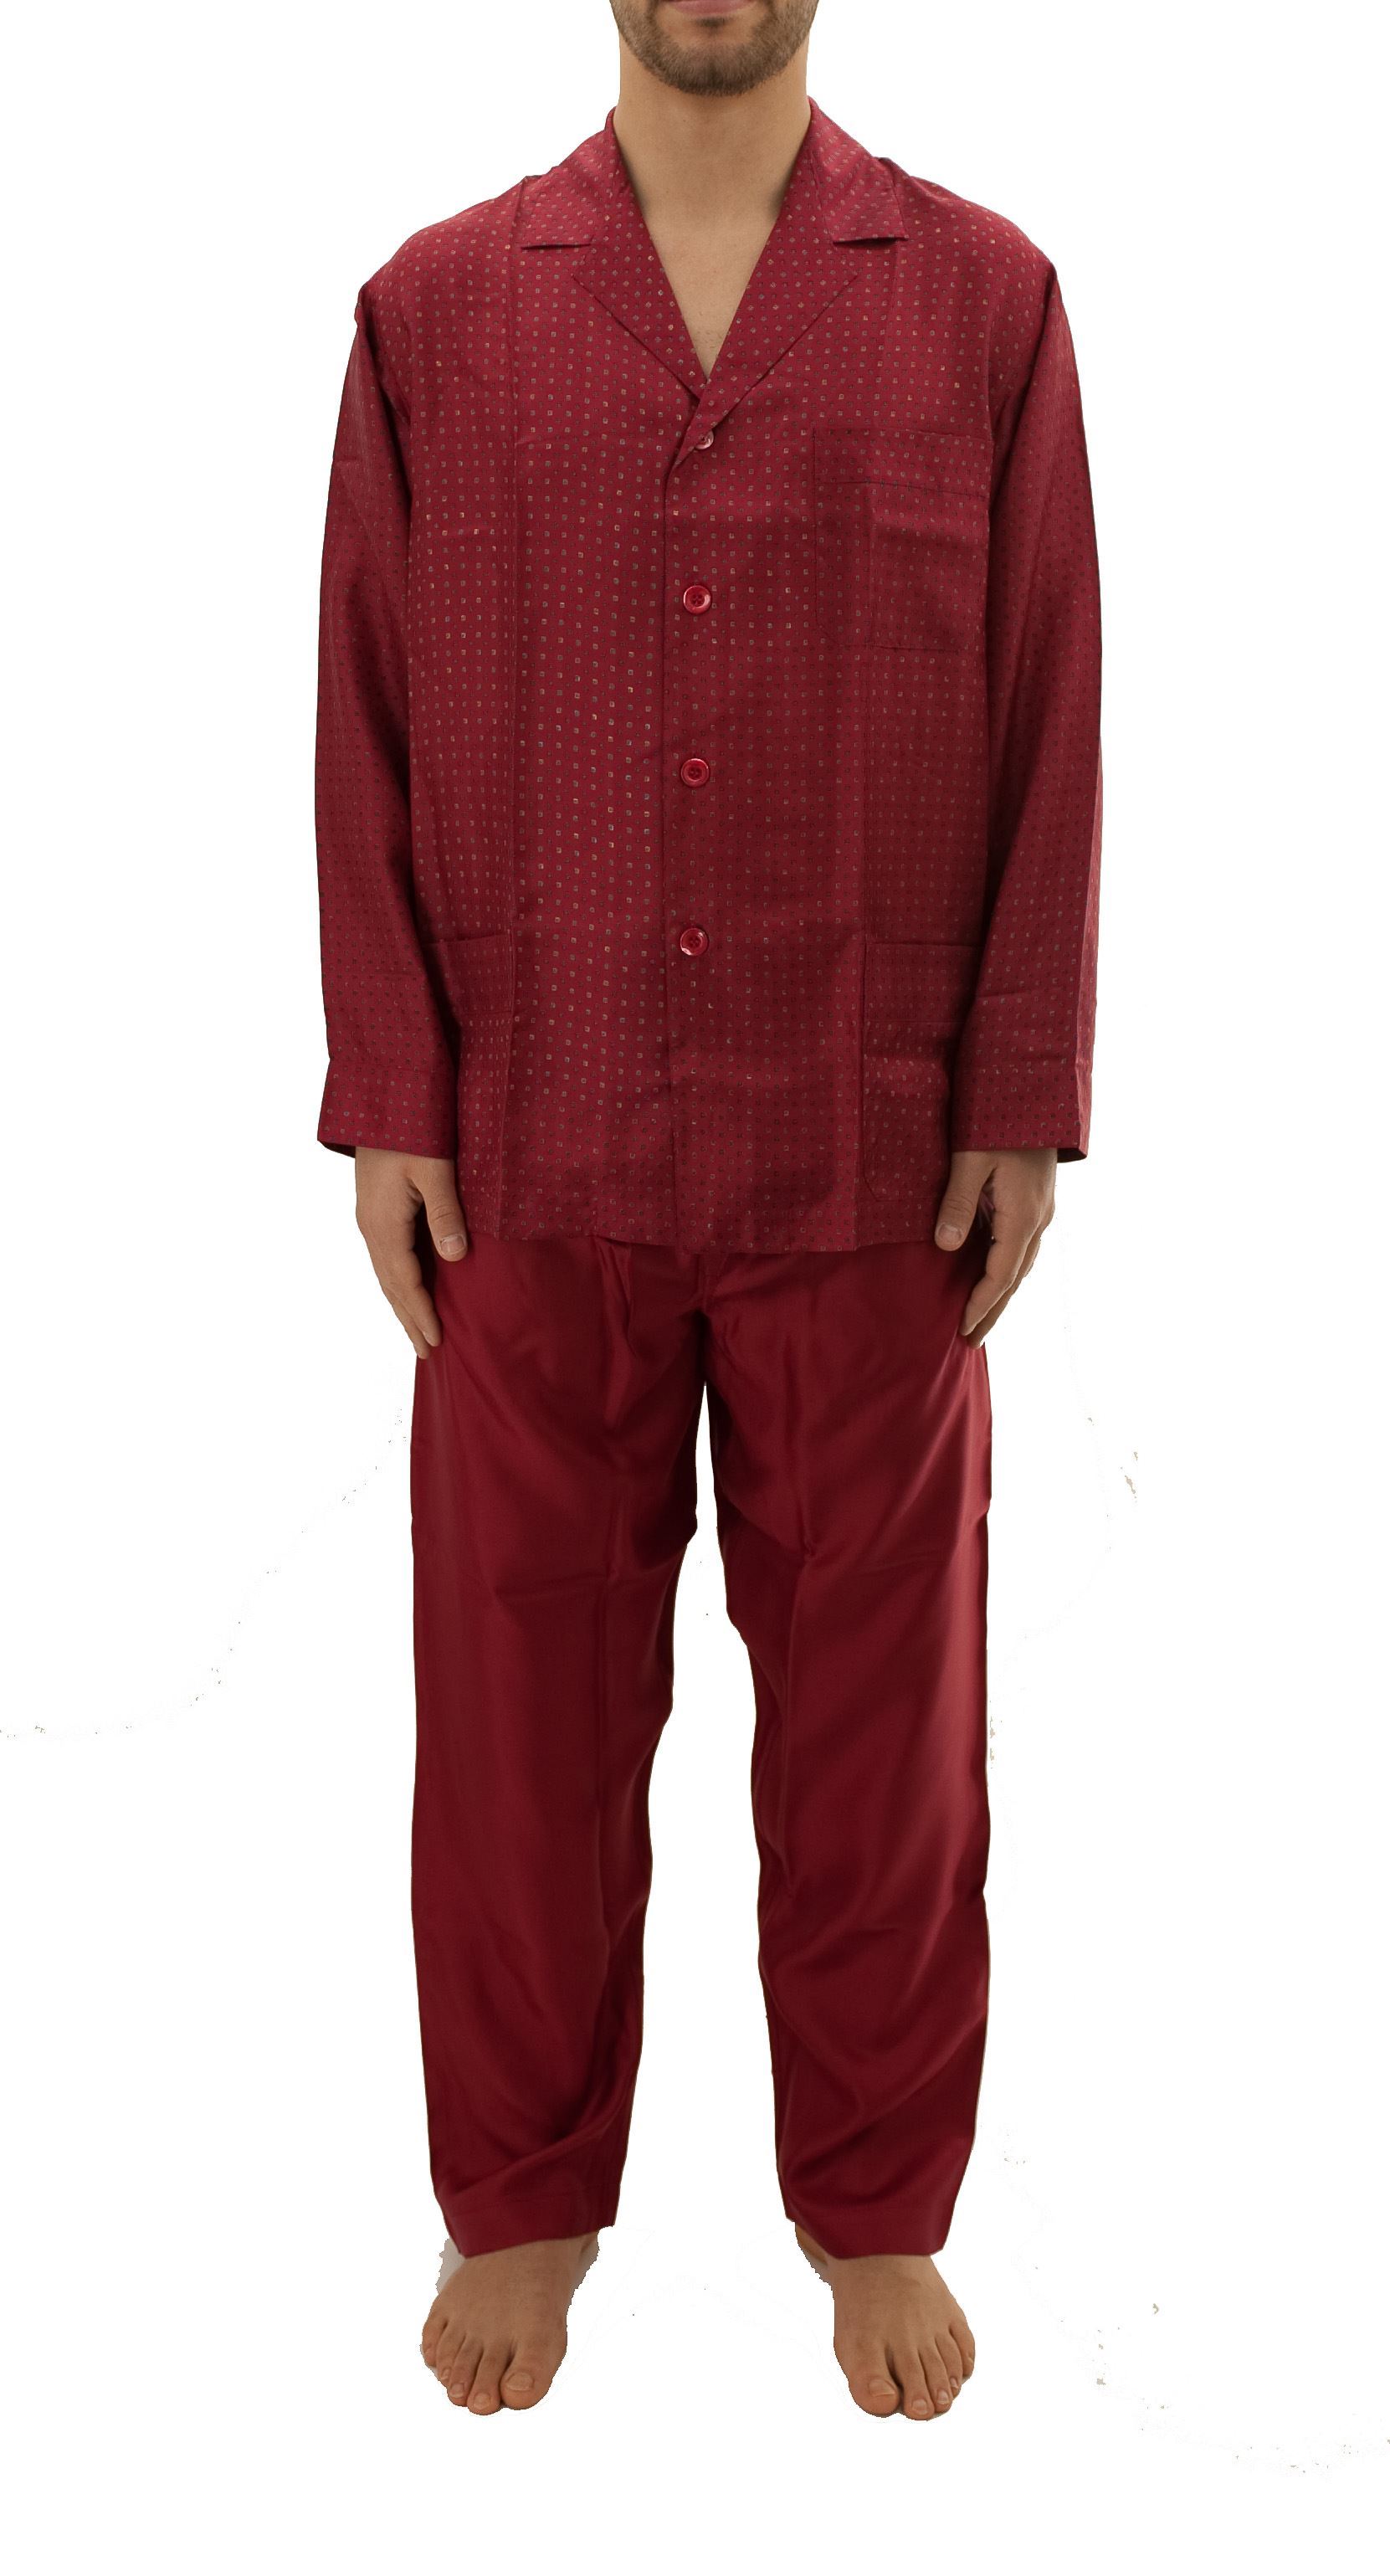 Picture of Men's Silk Pajamas with buttons